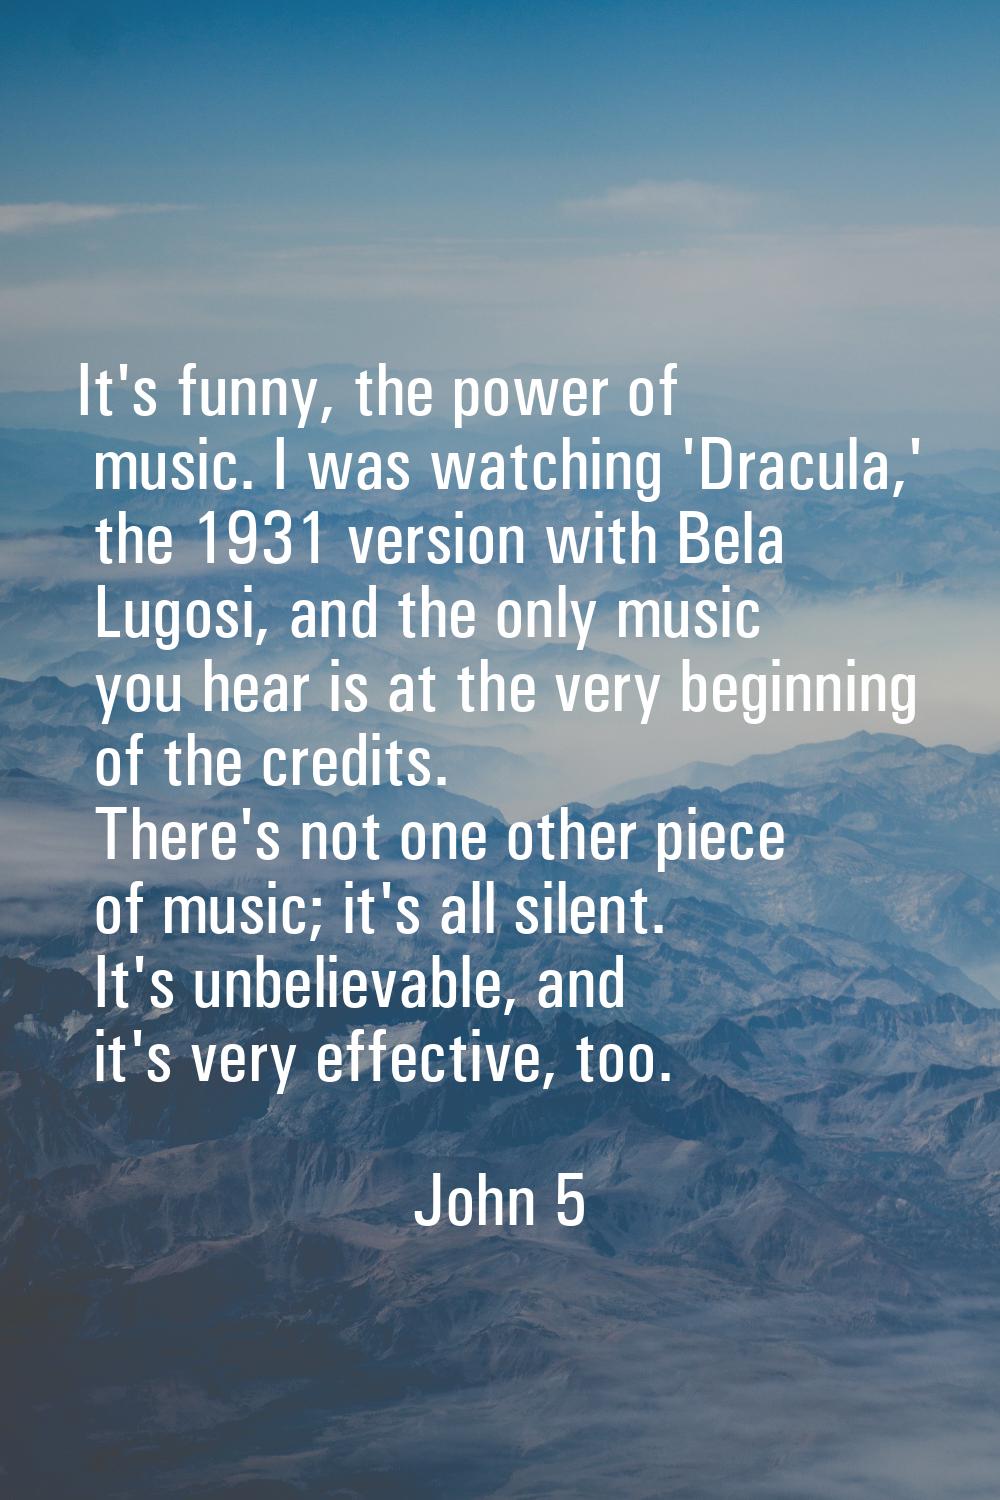 It's funny, the power of music. I was watching 'Dracula,' the 1931 version with Bela Lugosi, and th